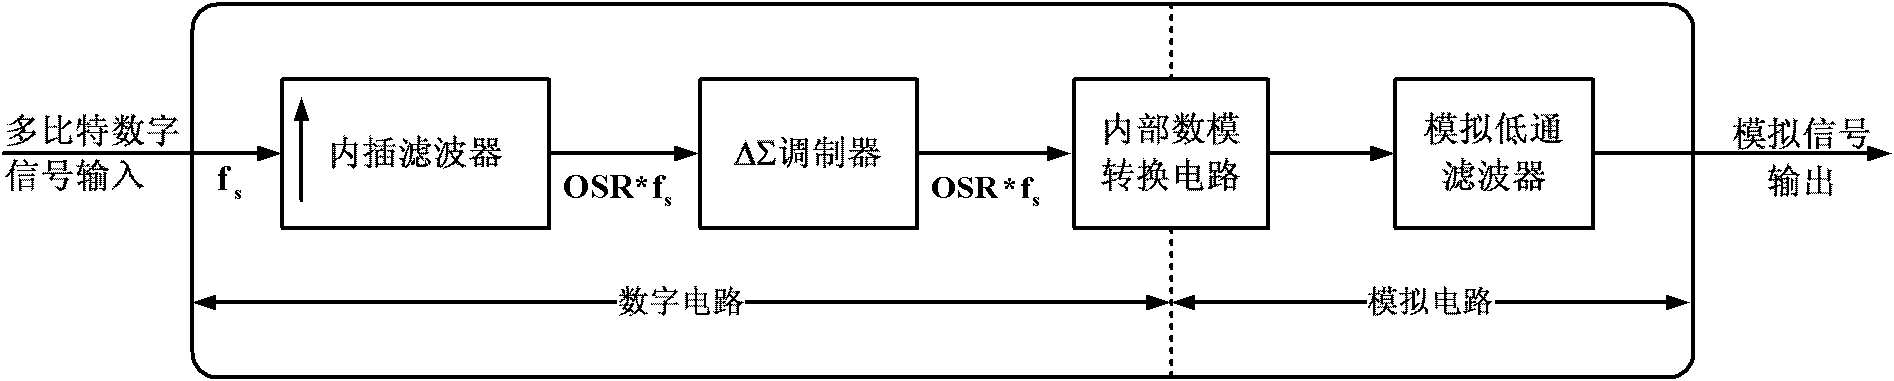 Digital-to-analog converter capable of optimizing power consumption and output signal-to-noise ratio